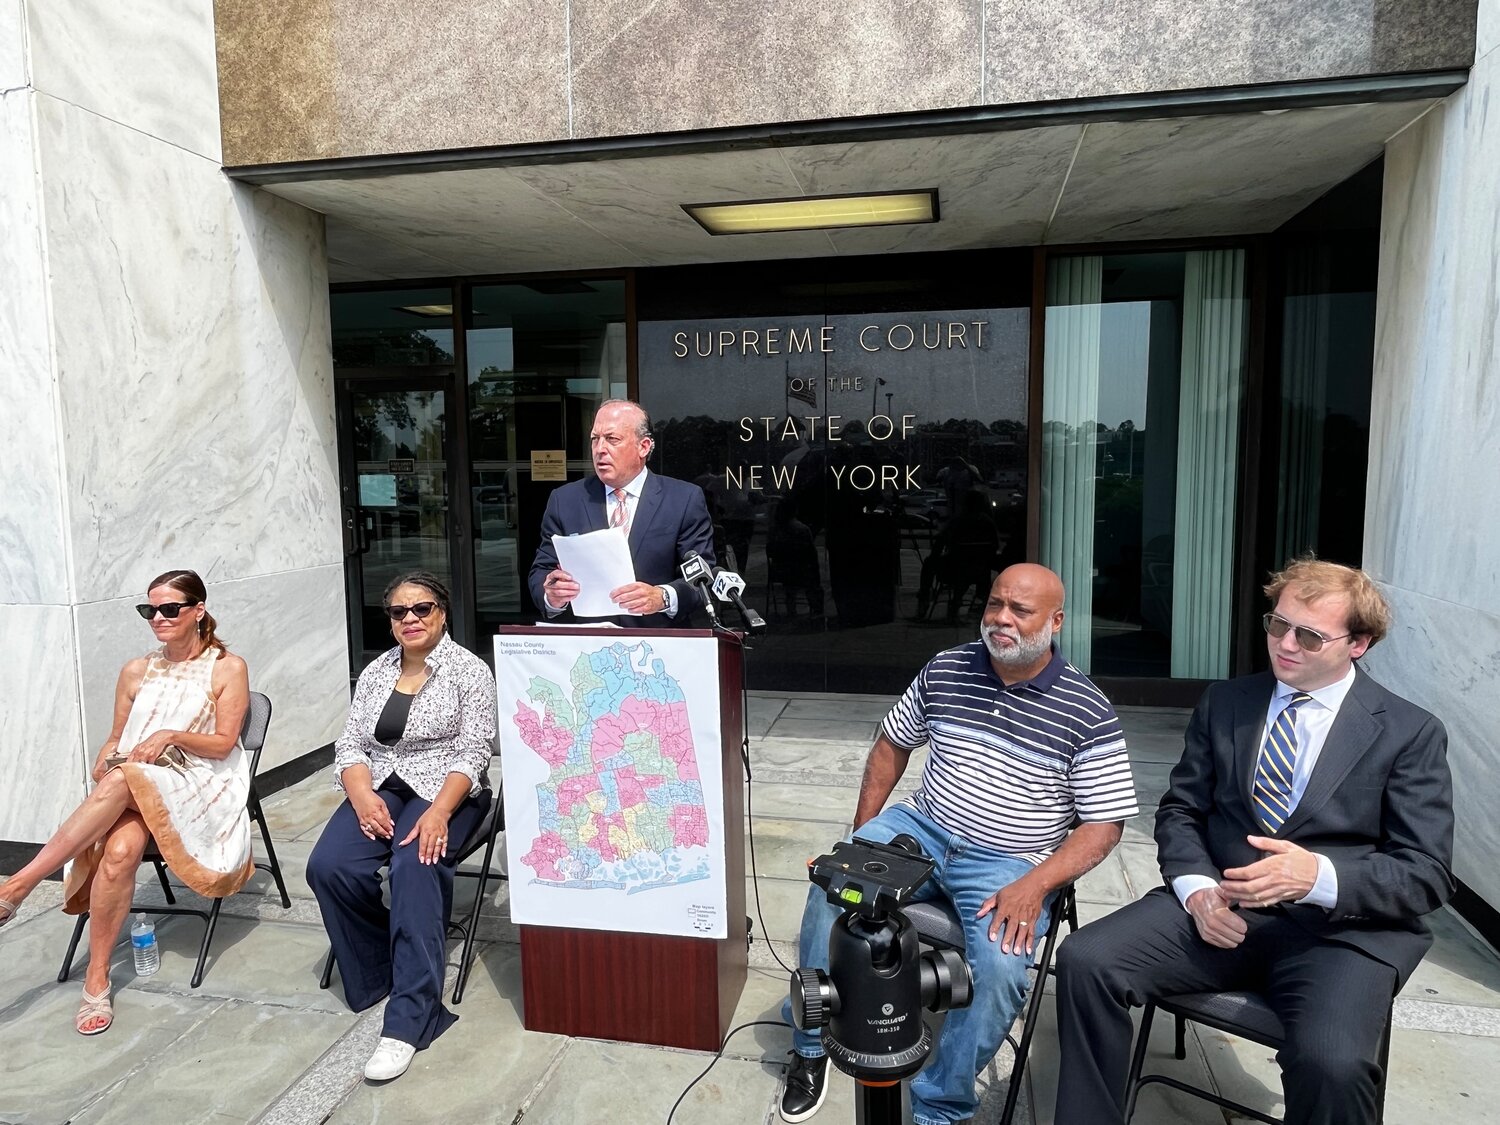 Attorney David Mejias speaks about what he calls ‘an illegal gerrymander’ alongside some of the plaintiffs and supporters of the lawsuit filed against the Nassau County Legislature over what they claim are new district maps that favor the majority Republicans over Democrats. Joining Mejias were, from left, Pamela Korn, Mimi Pierre-Johnson, Darien Ward and John Jarvis.